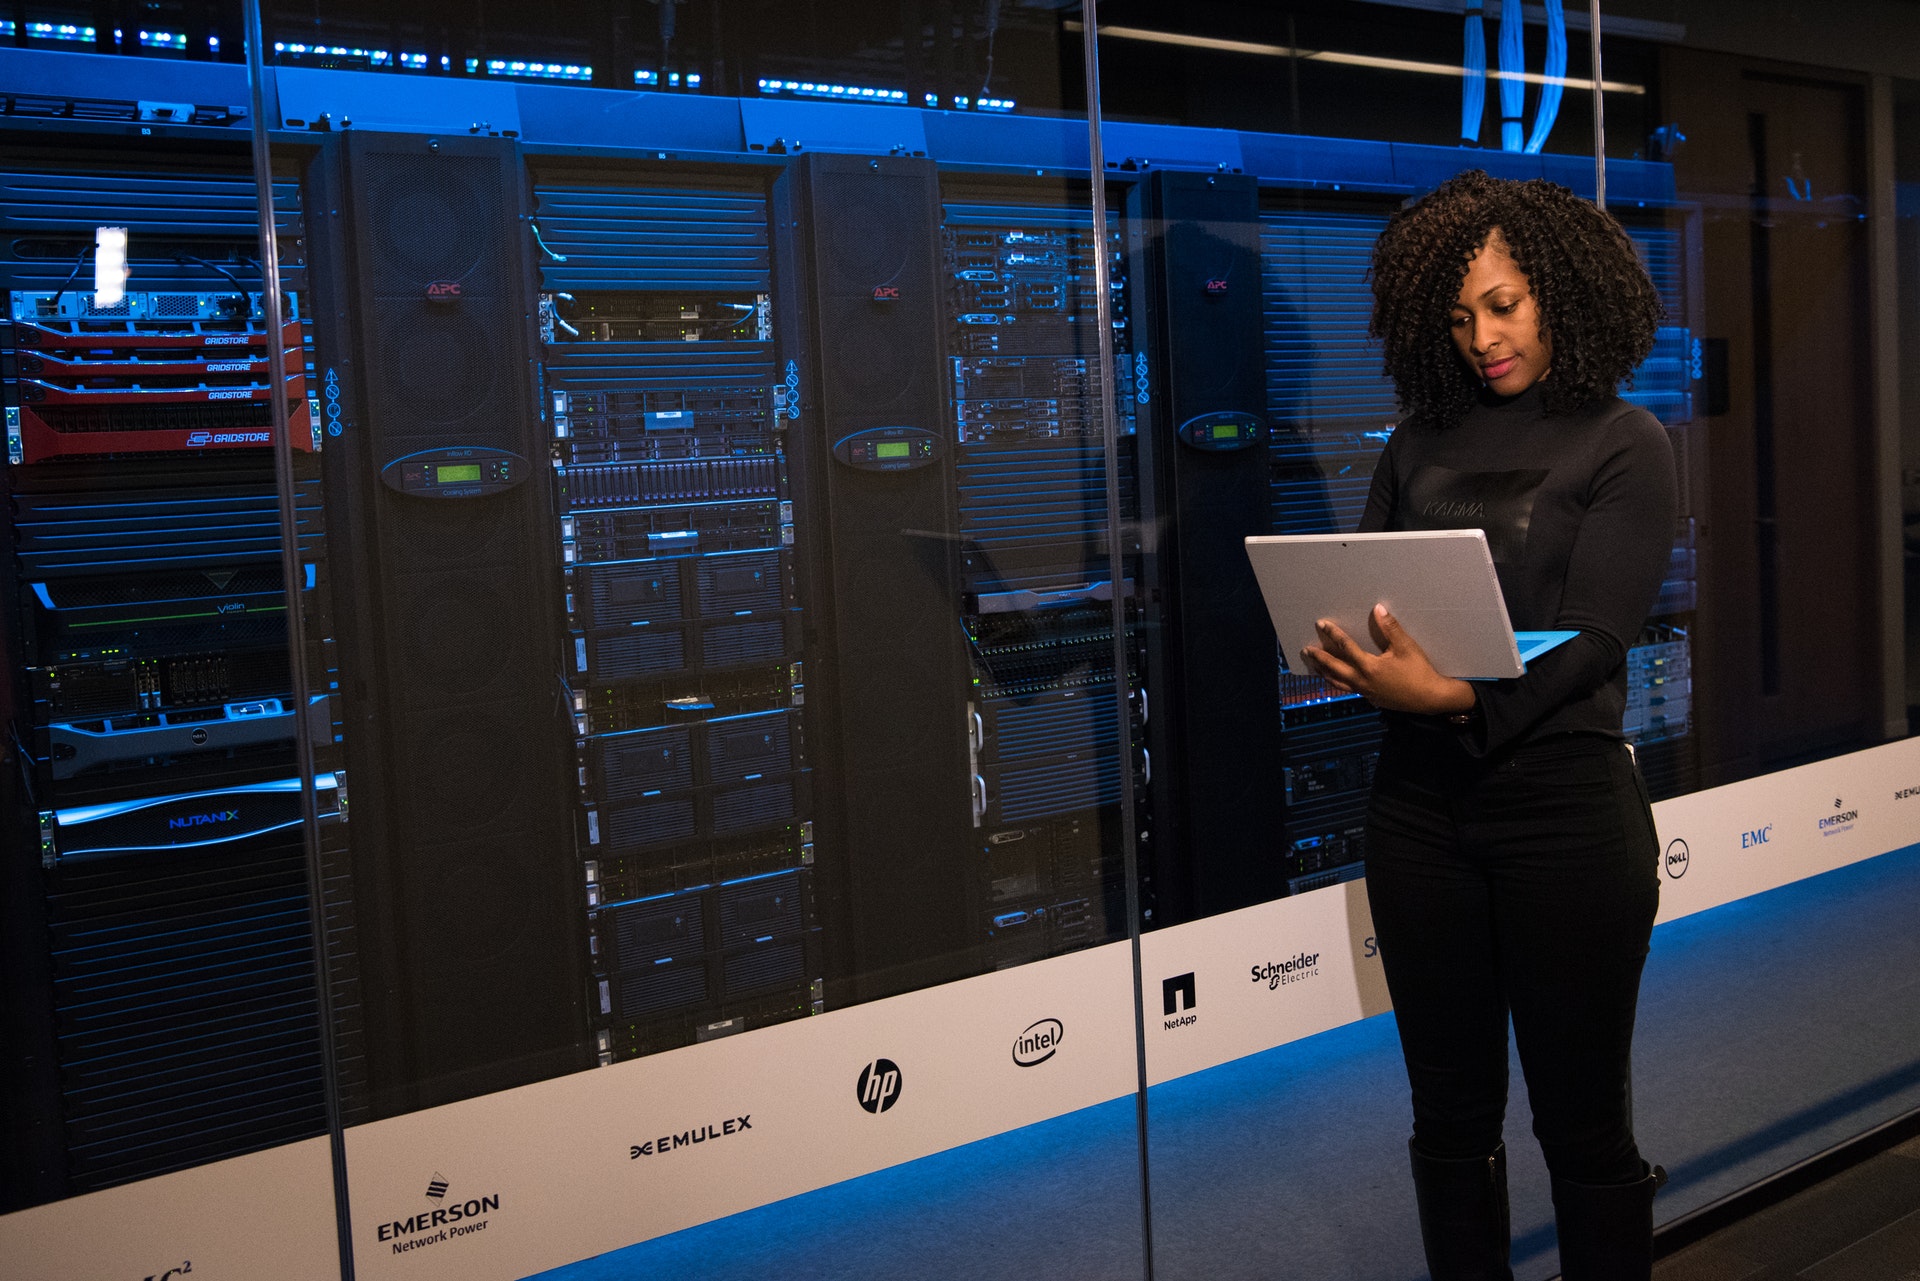 Woman standing next to computer servers